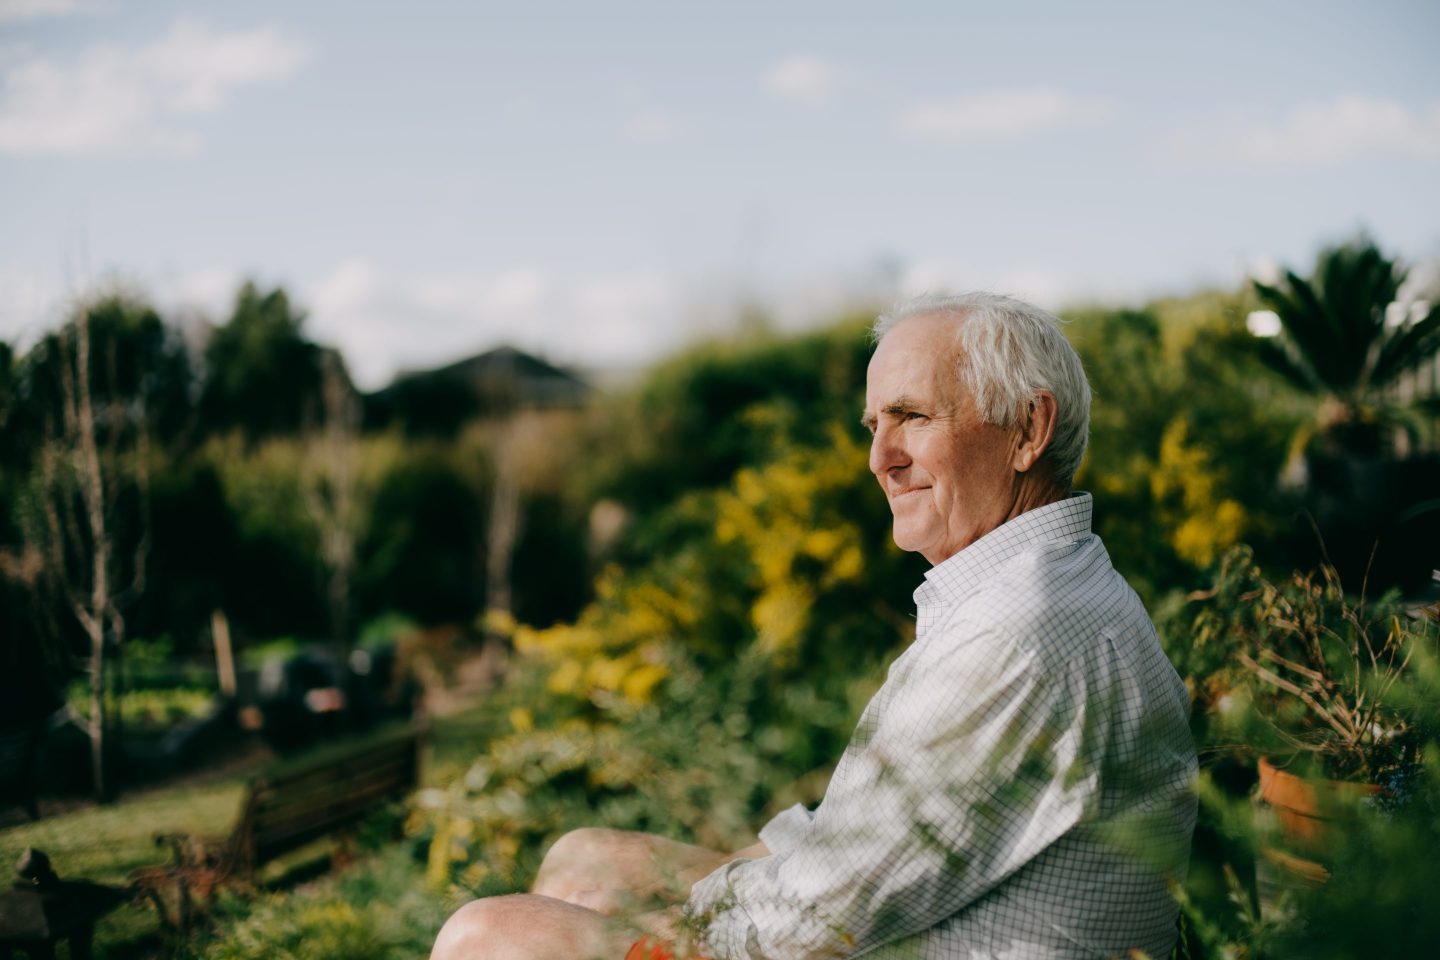 Confident senior man sitting in garden and looking at view, Melbourne, Australia.